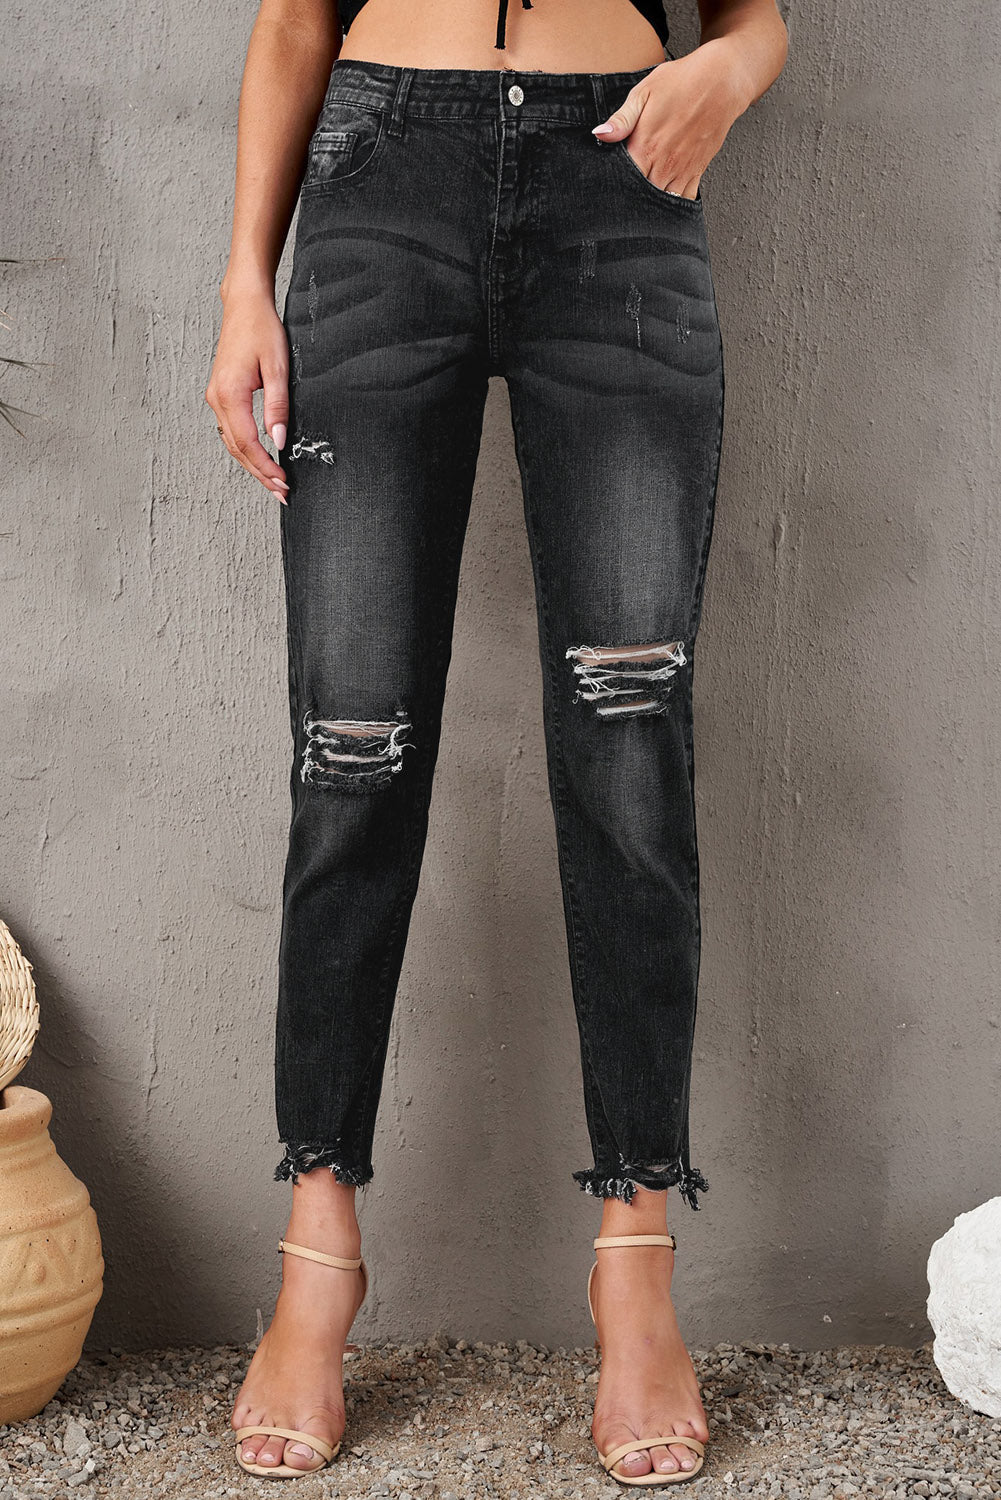 Stylish Distressed Cropped Jeans - Black / 4 - Bottoms - Pants - 4 - 2024